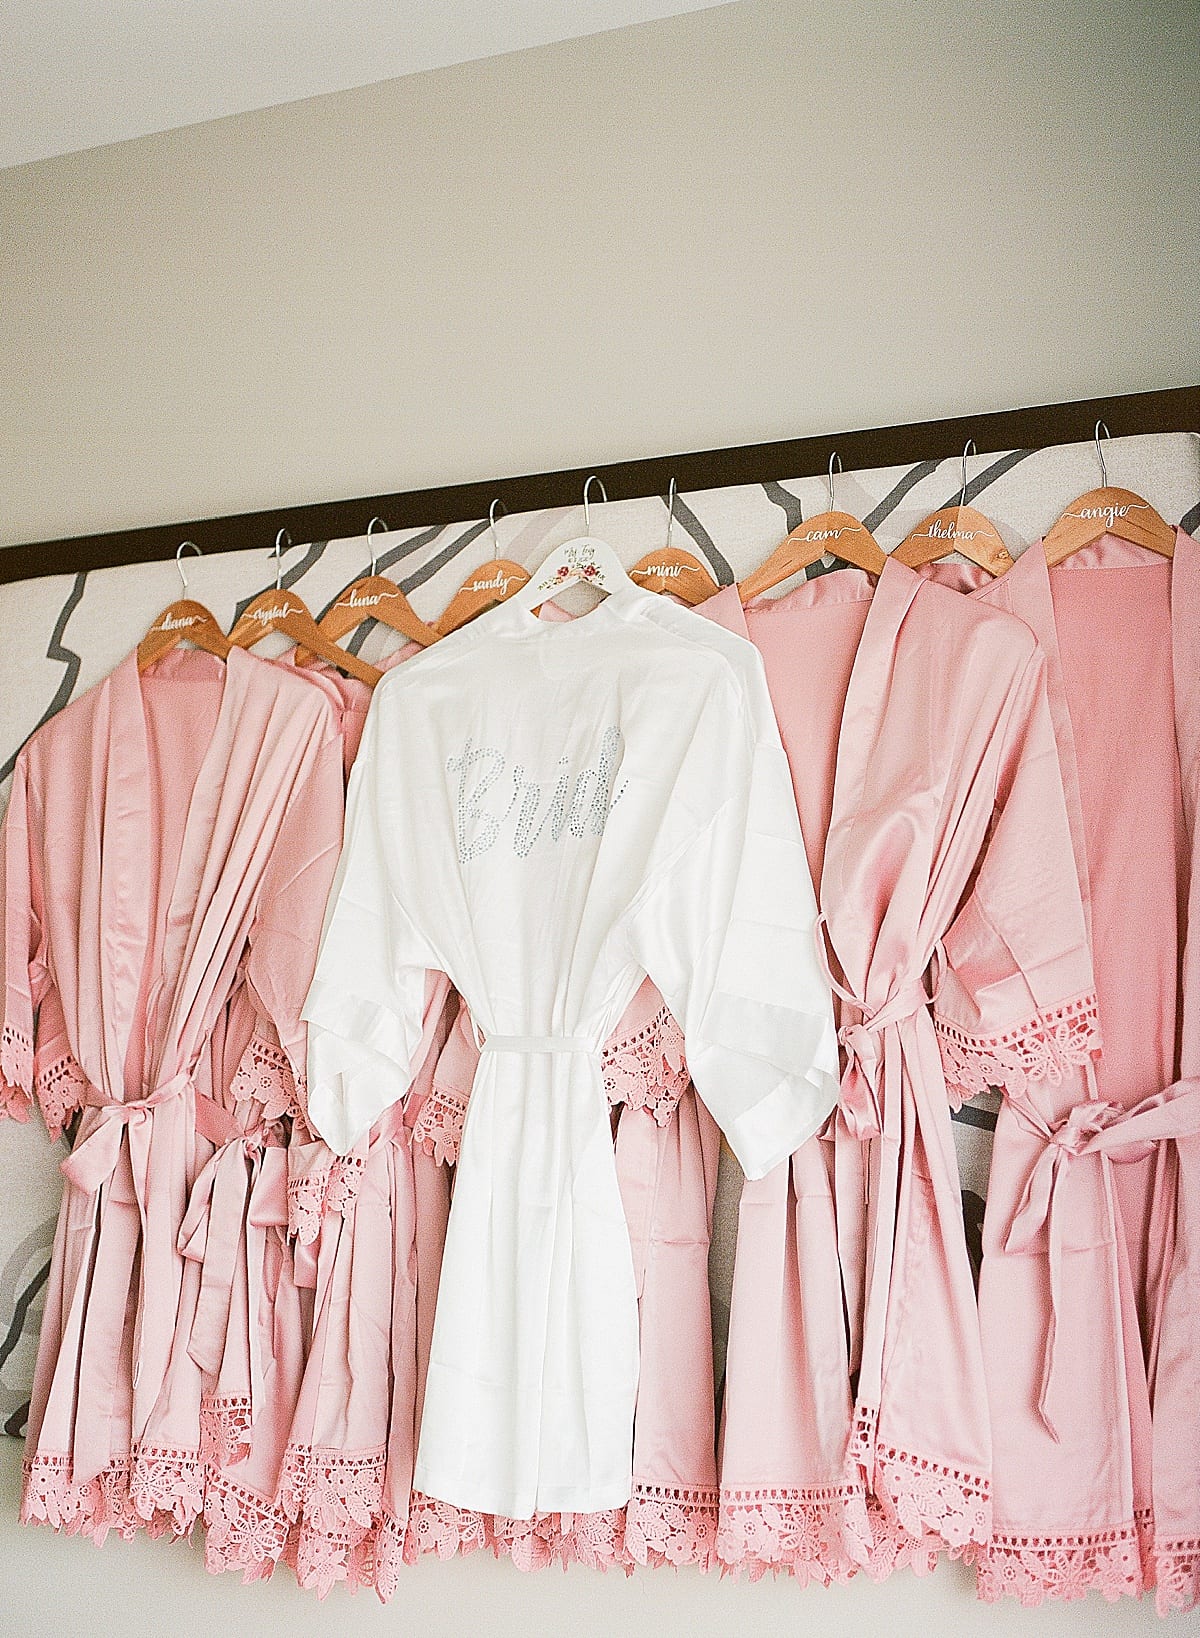 The Hotel at Avalon Bride and Bridesmaids Robes Hanging Photo